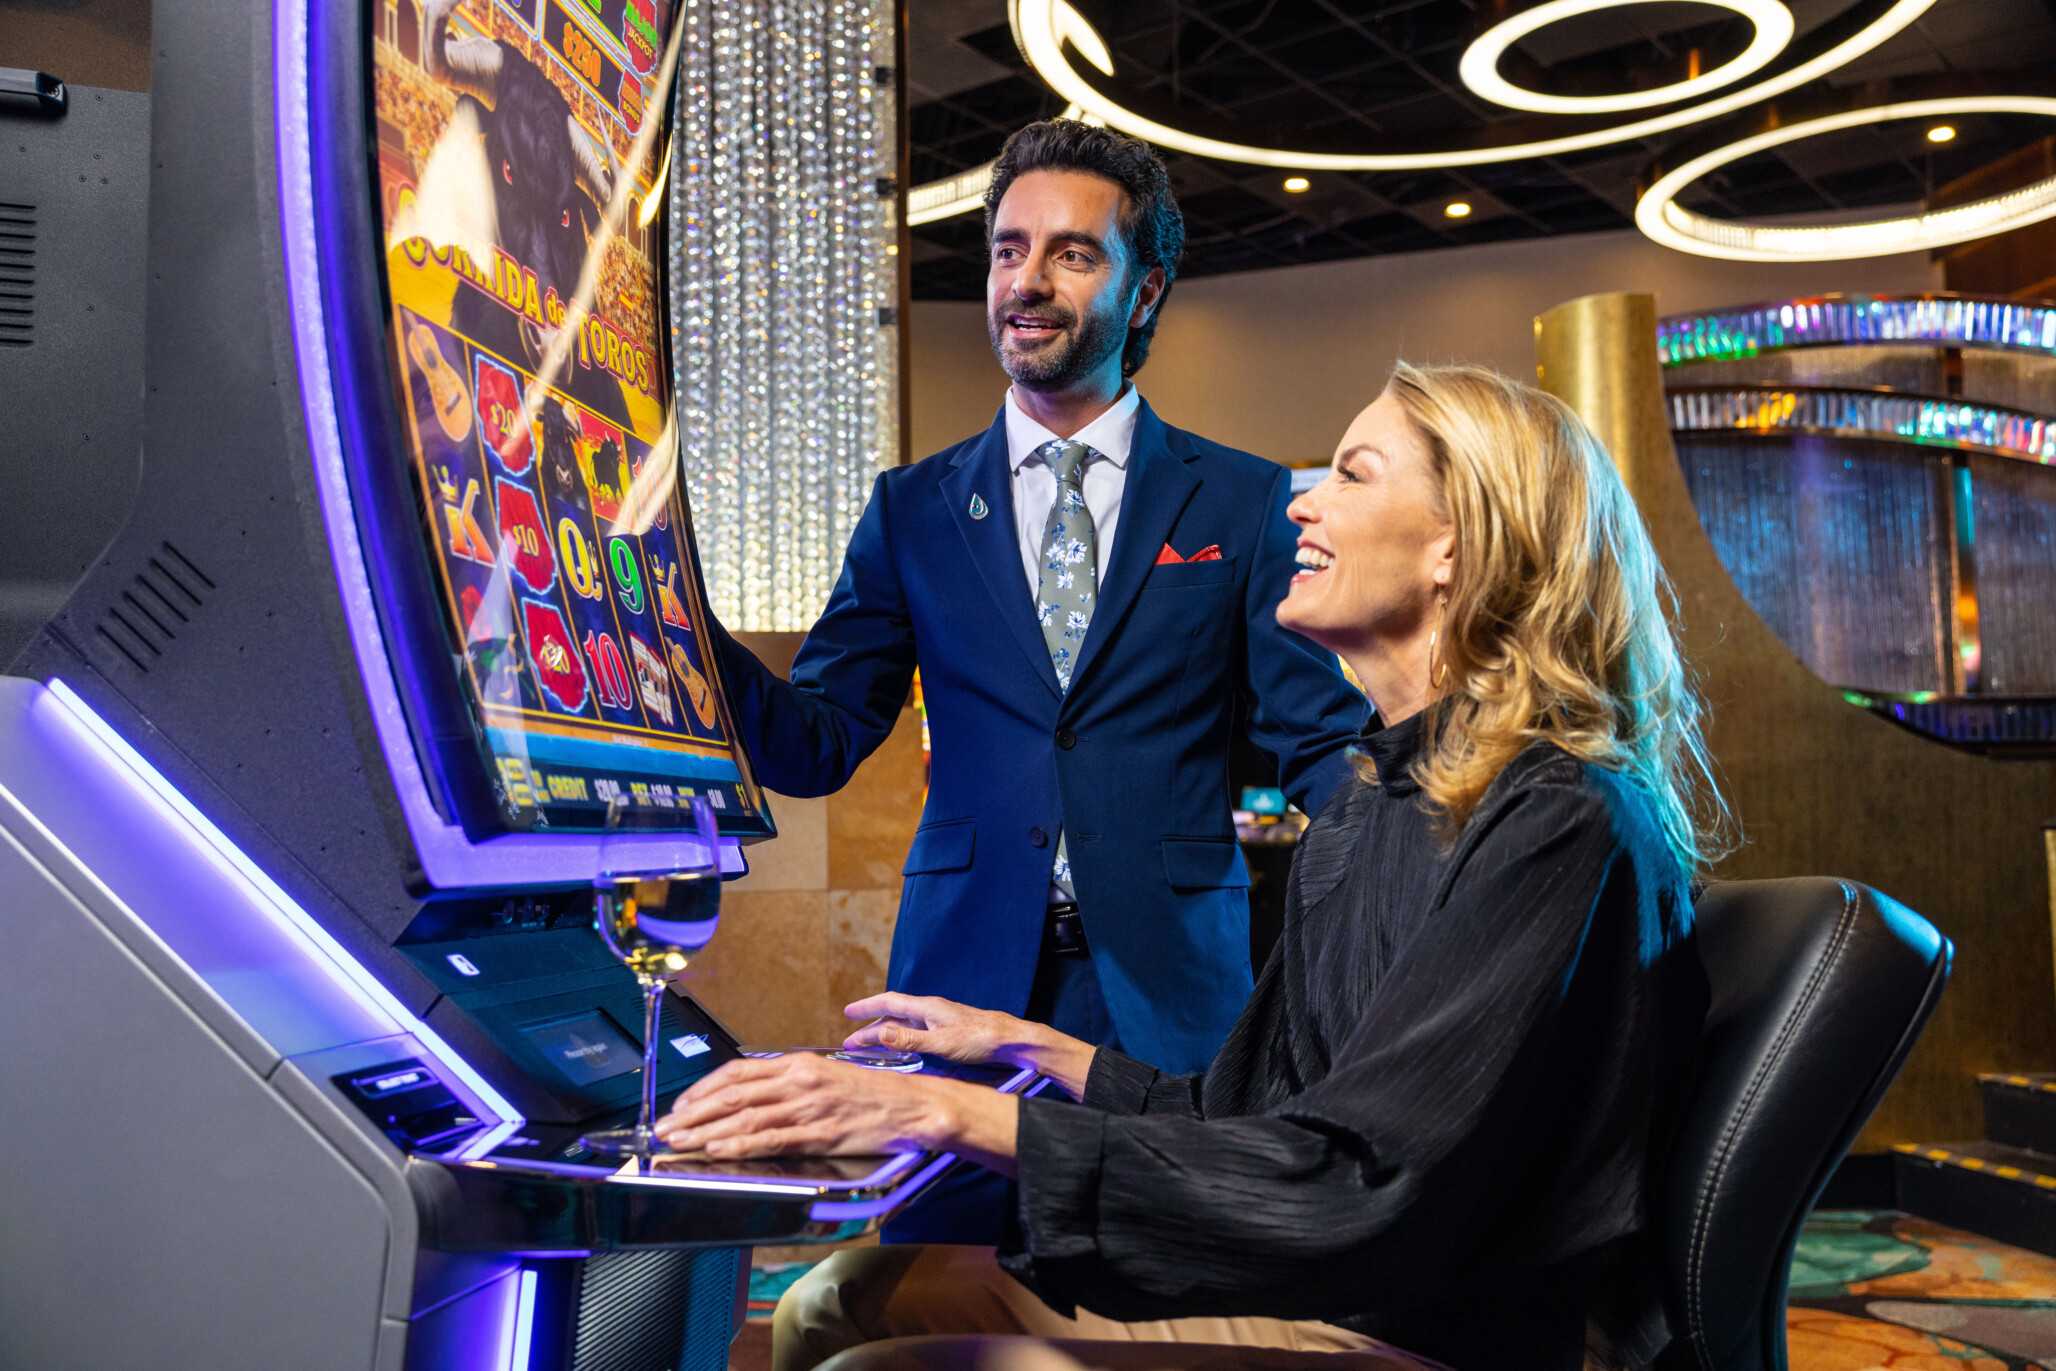 A casino host is encouraging a slot player.